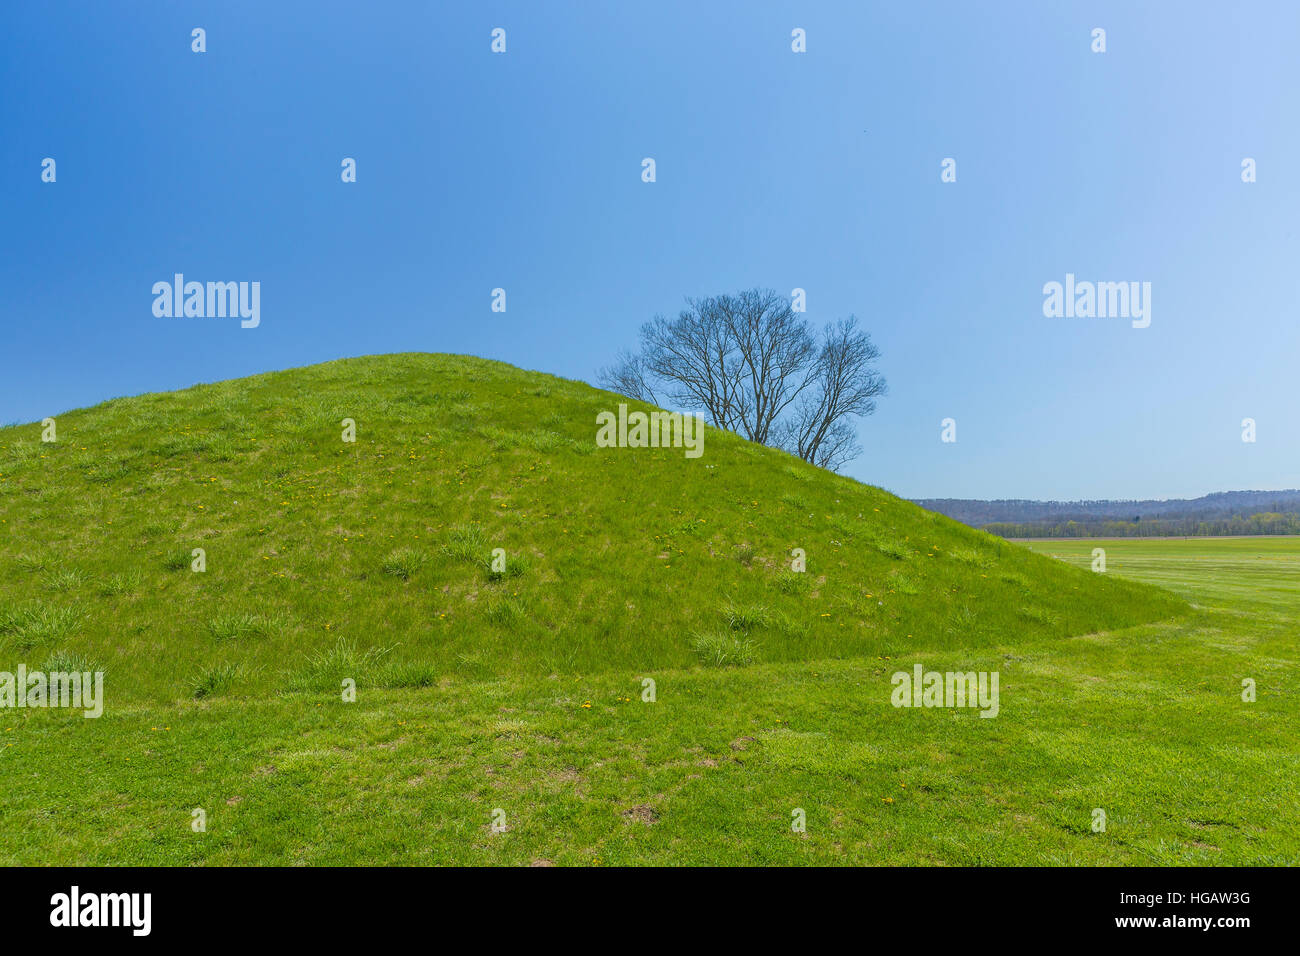 Seip Earthworks, where a civilization of early mound-building American ...